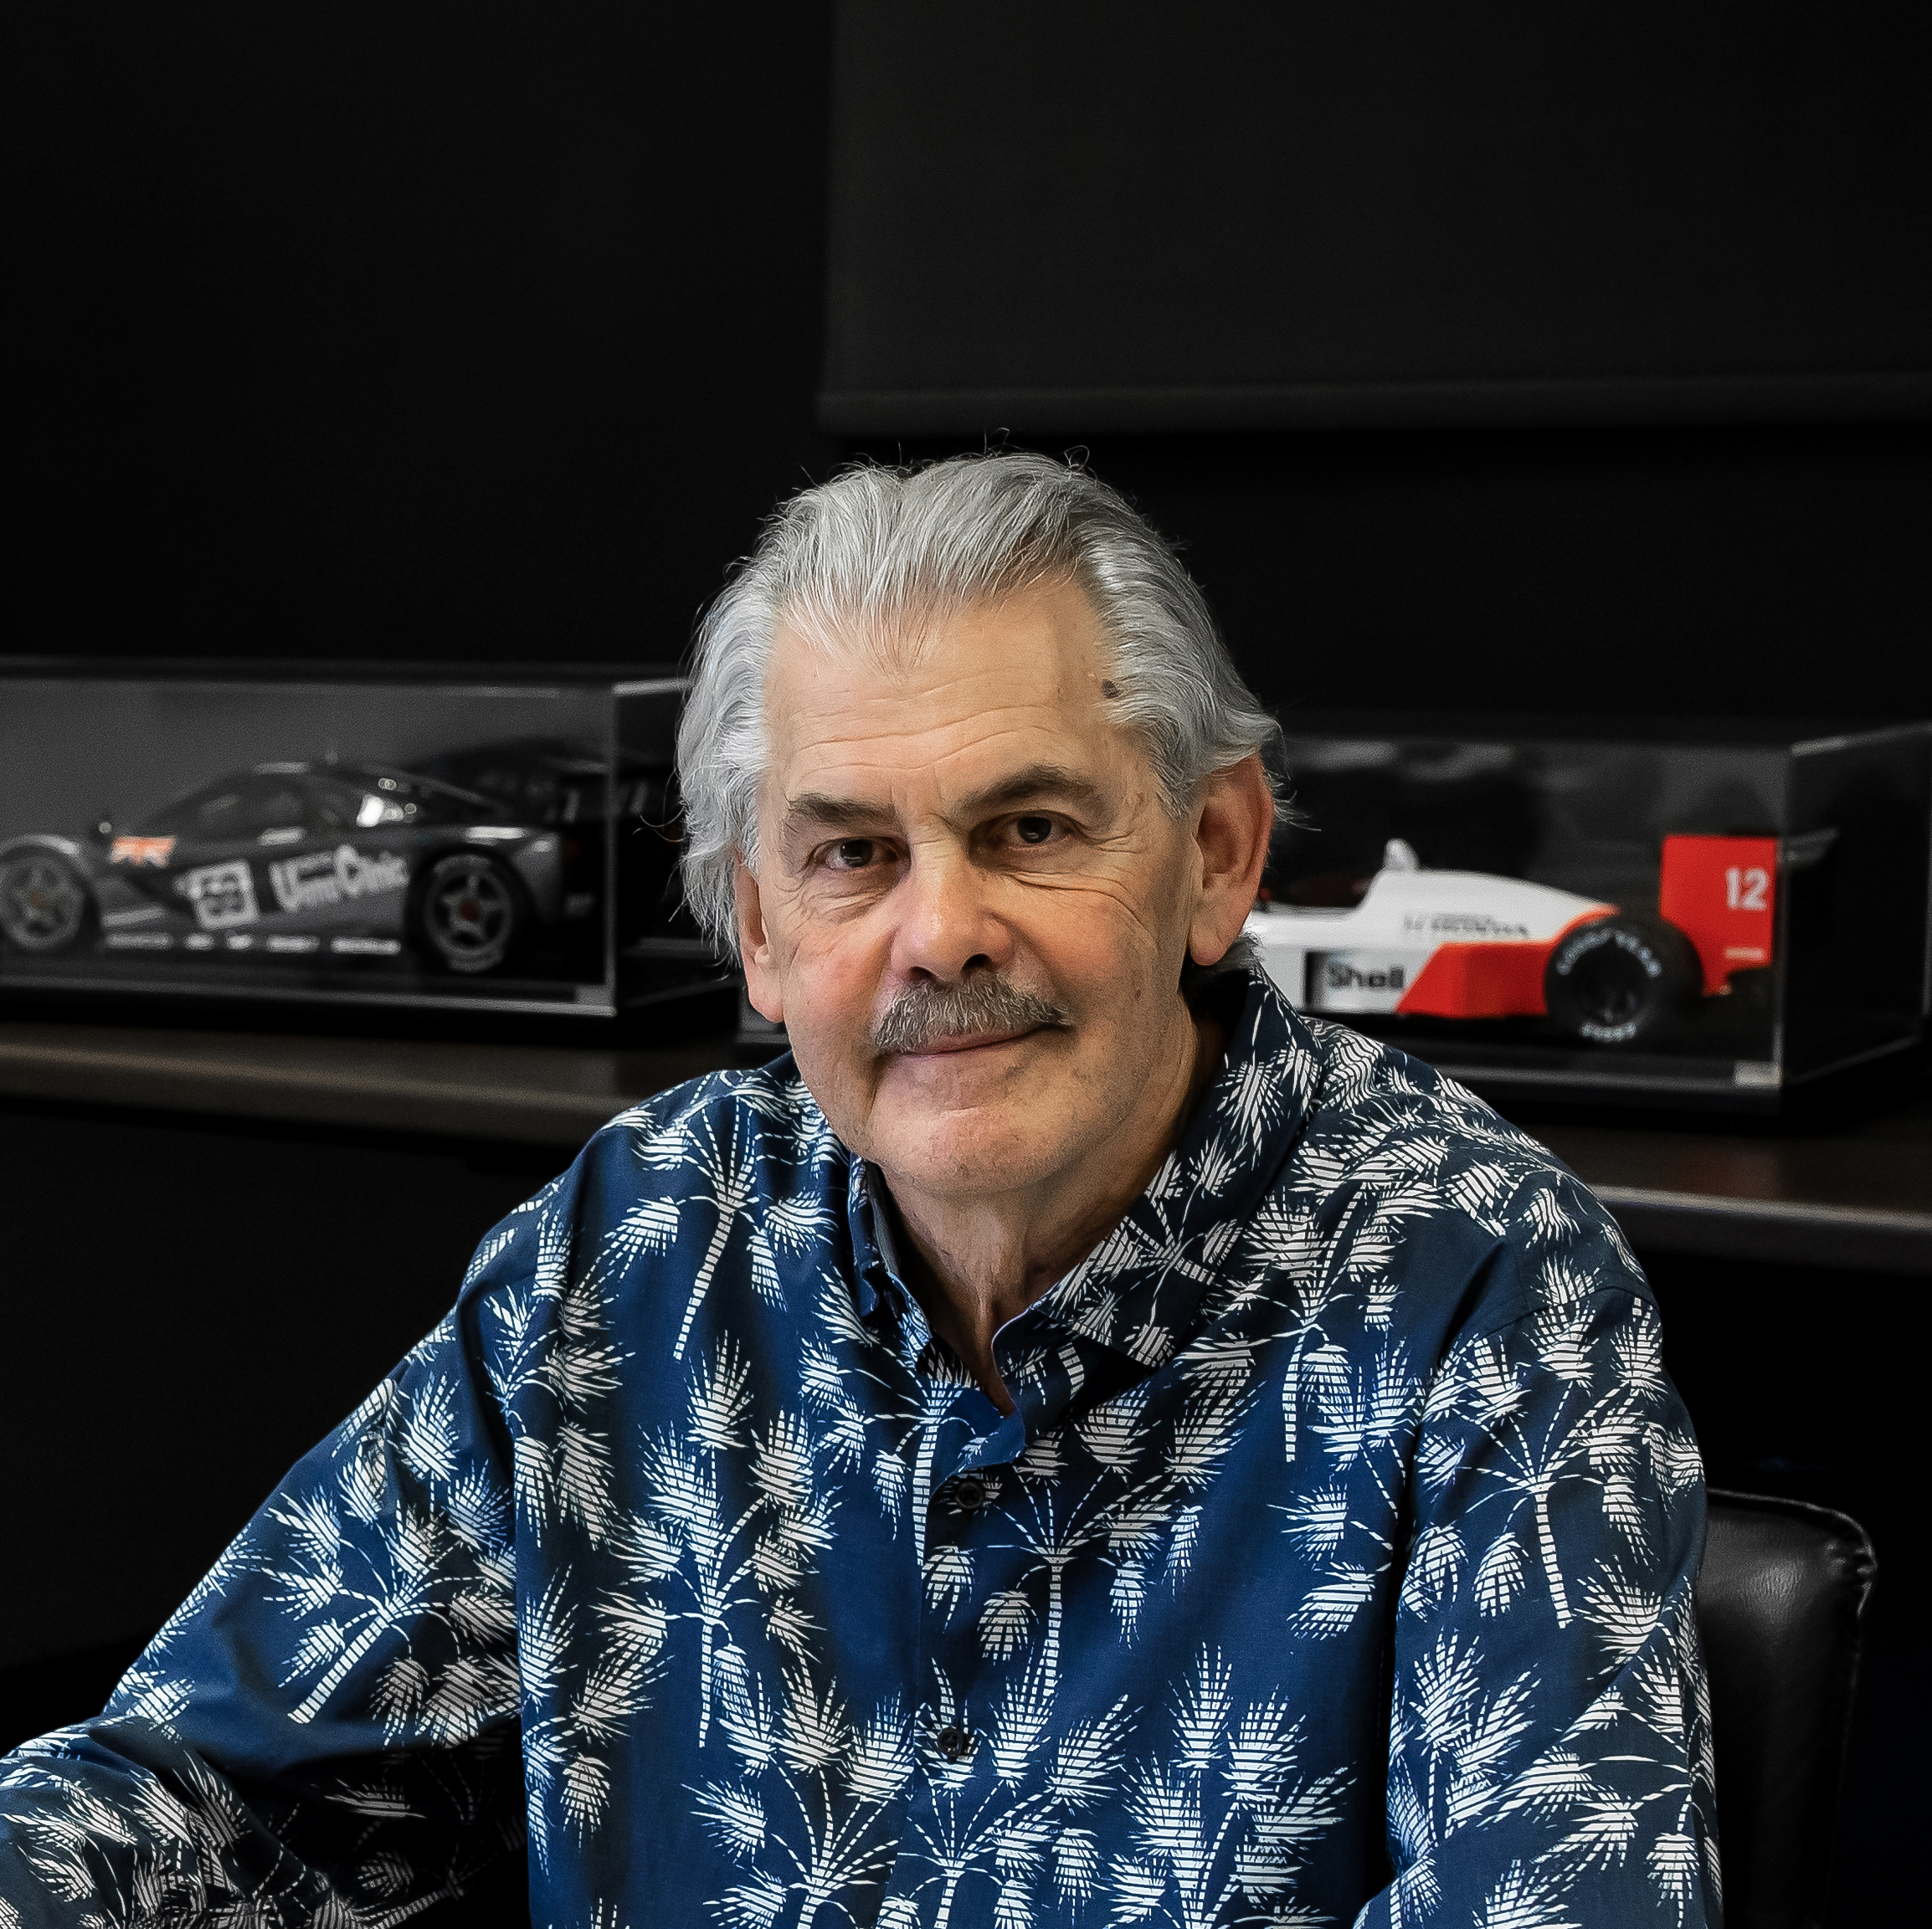 Gordon Murray tells Hagerty why his new T.50 hypercar will be better than  the McLaren F1